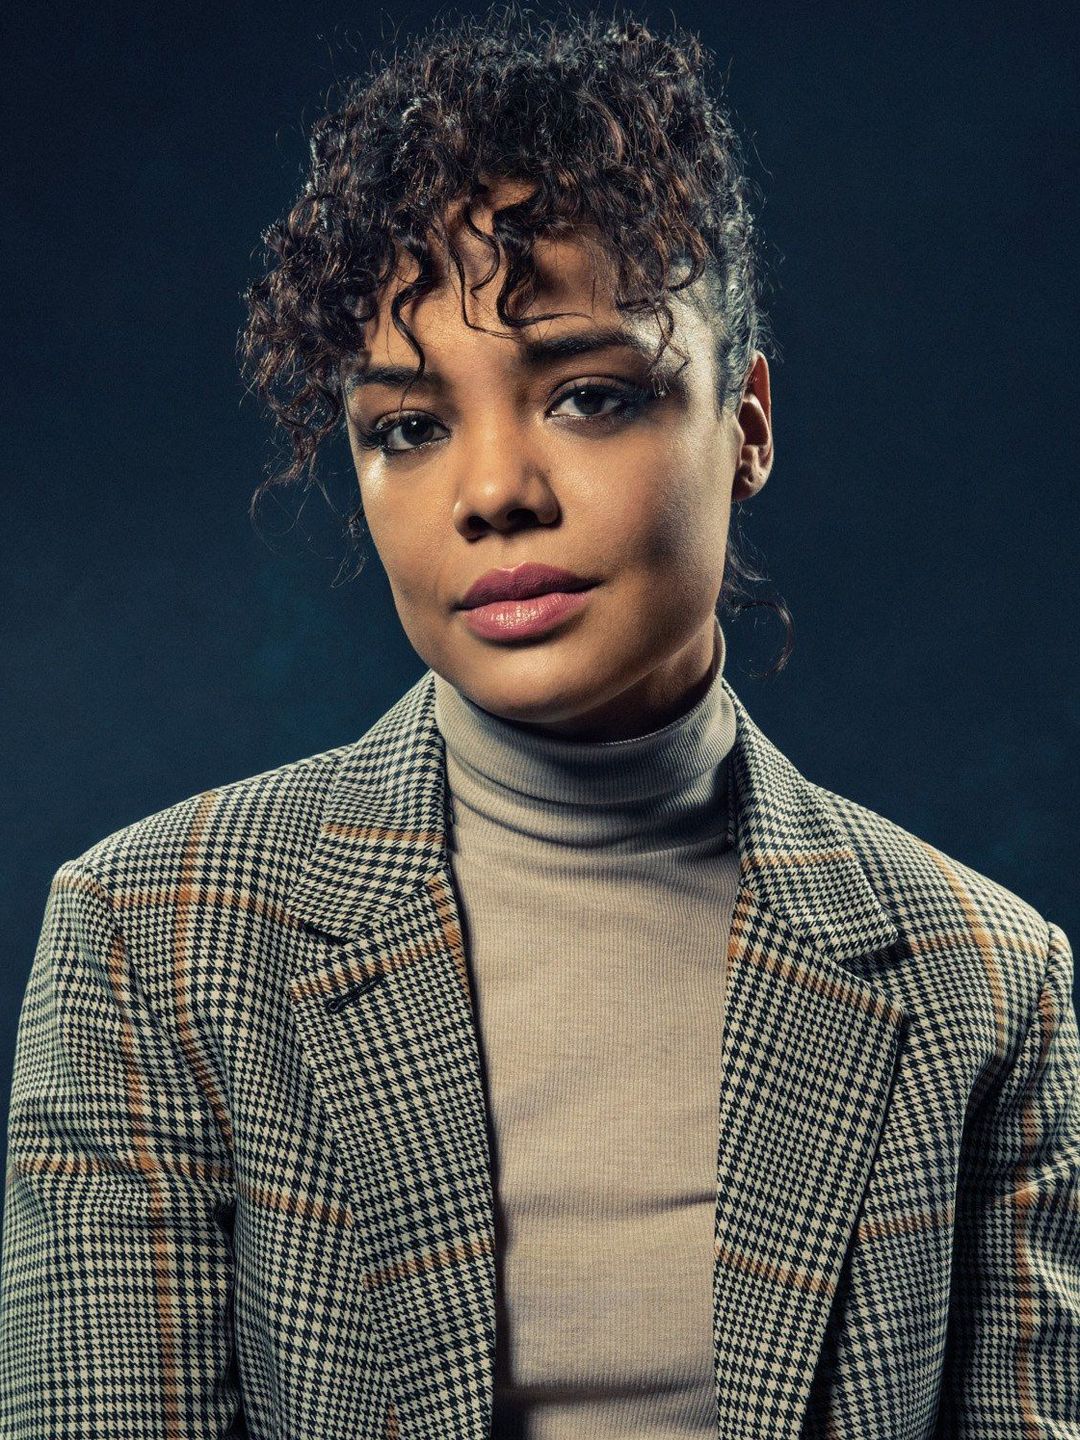 Tessa Thompson who is her mother